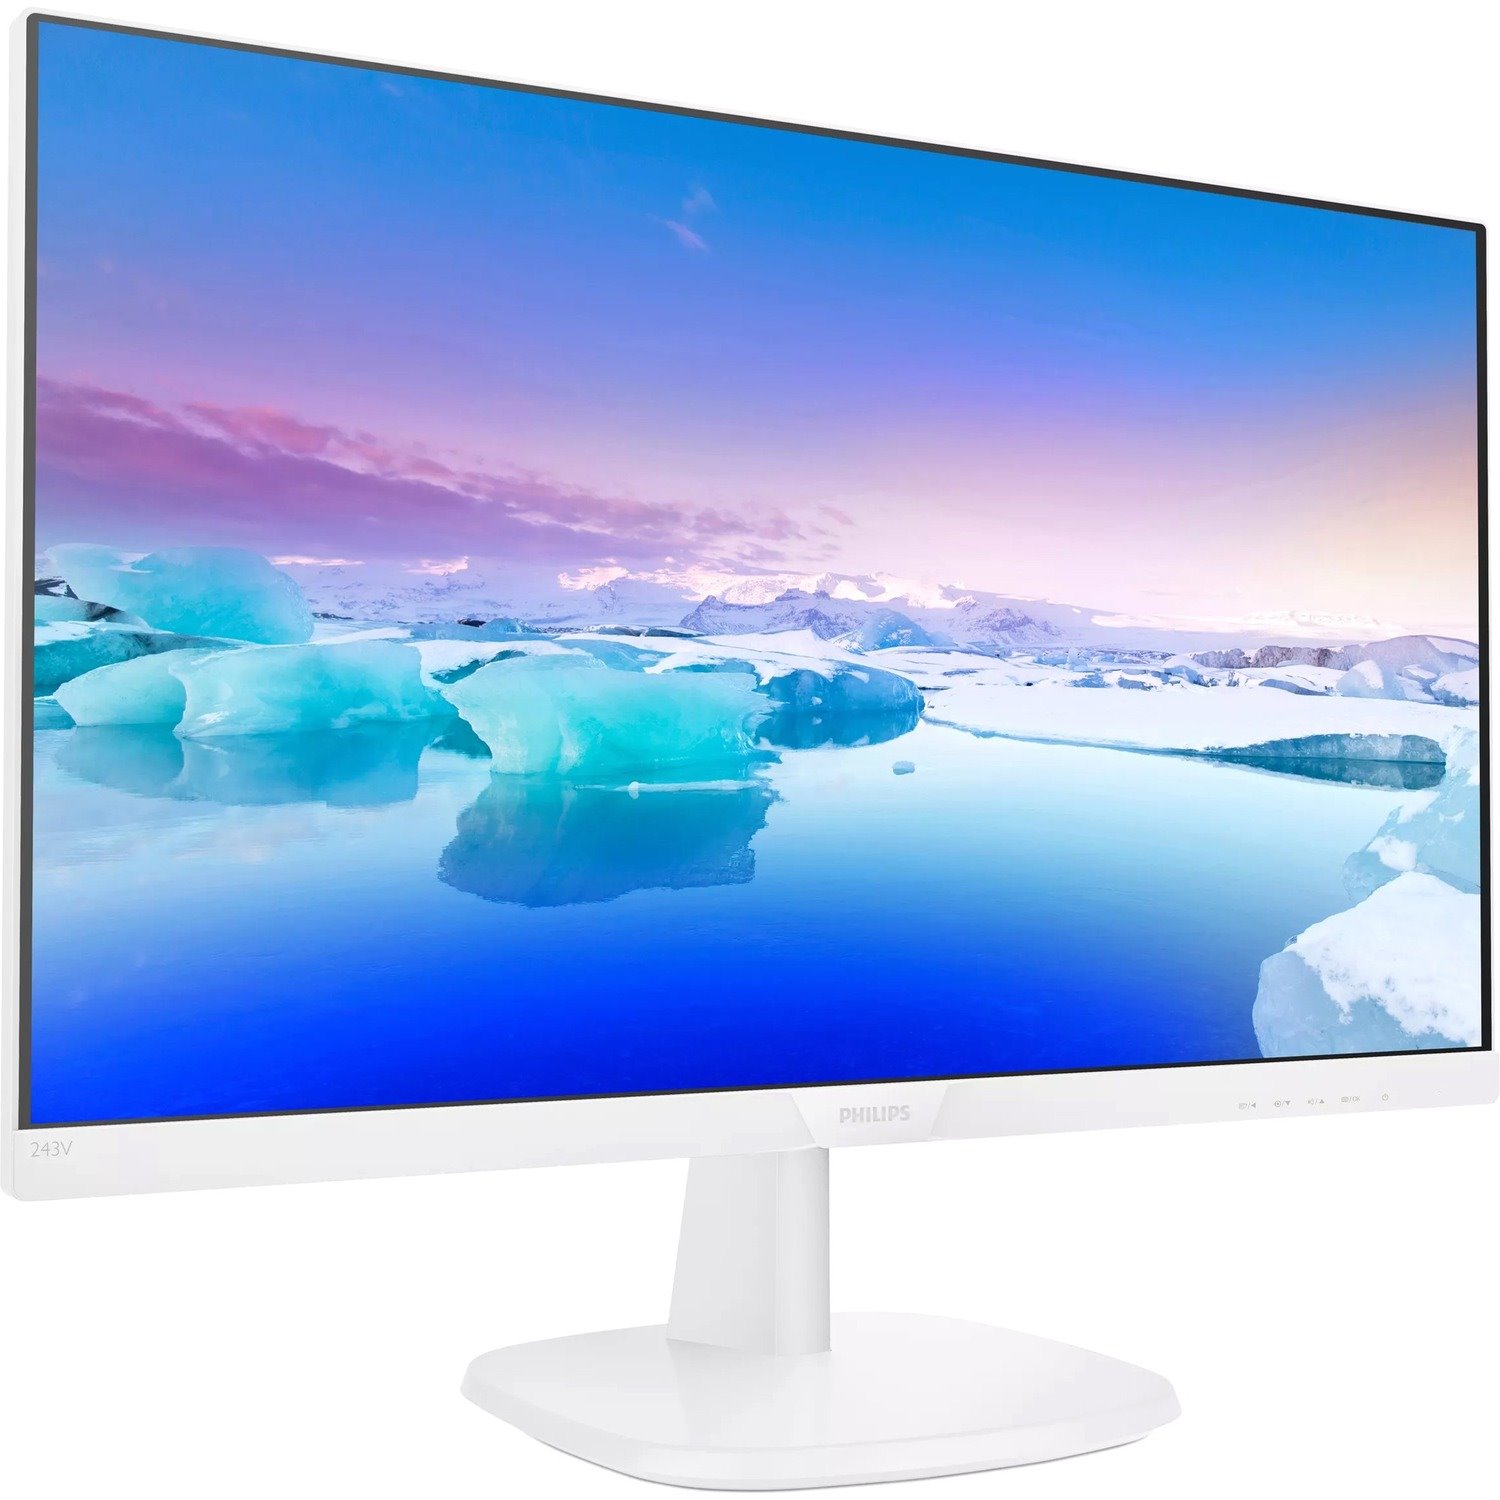 Philips 243V7QDAW 60.5 cm (23.8") Full HD WLED LCD Monitor - 16:9 - Textured White